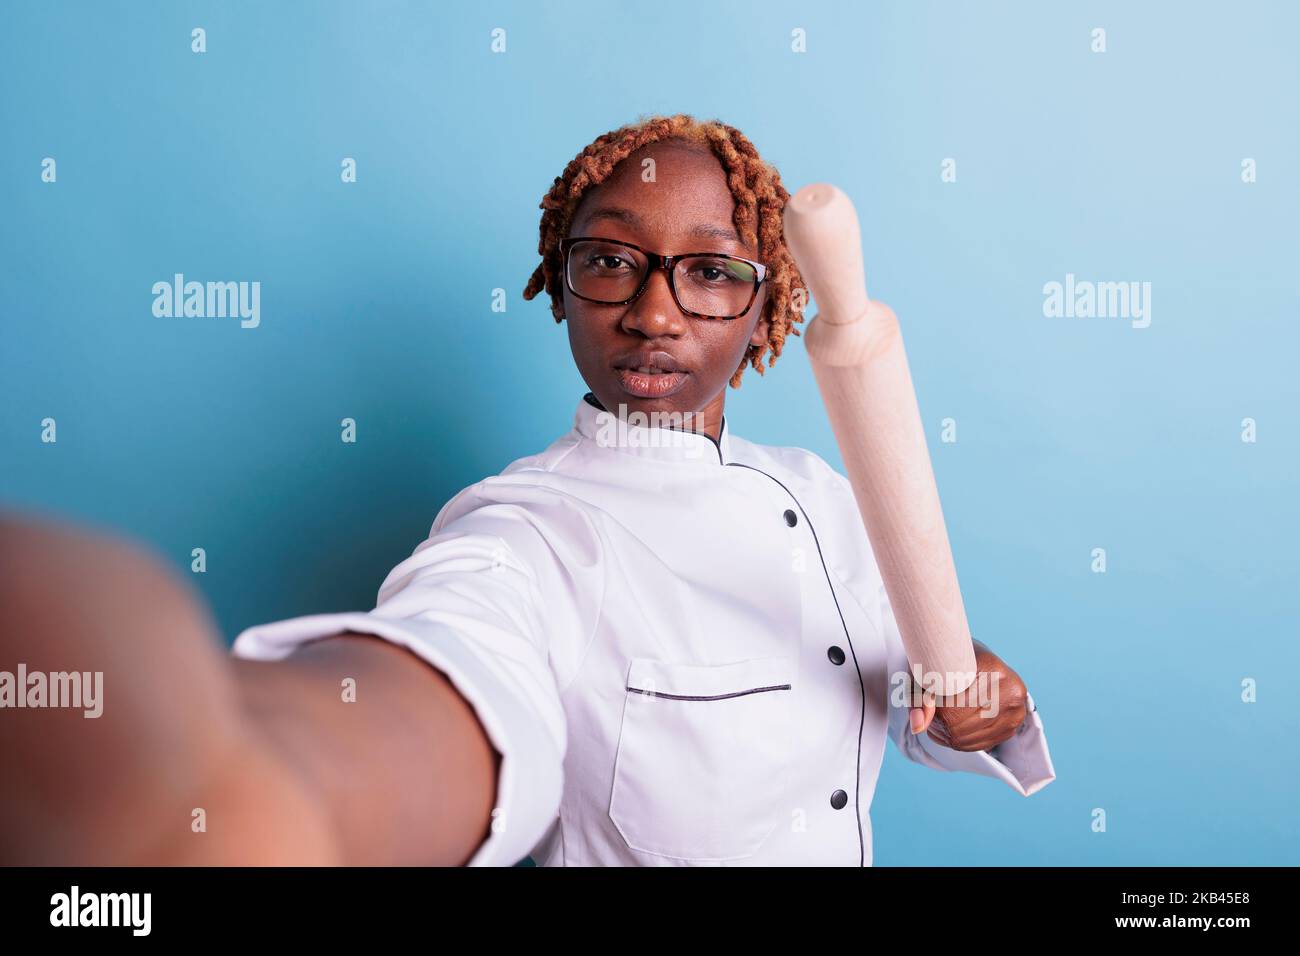 Angry female dinning hall subordinate threatening via video call. Annoyed african american chef intimidating with rolling pin. Self portrait of angry cooker in uniform. Stock Photo